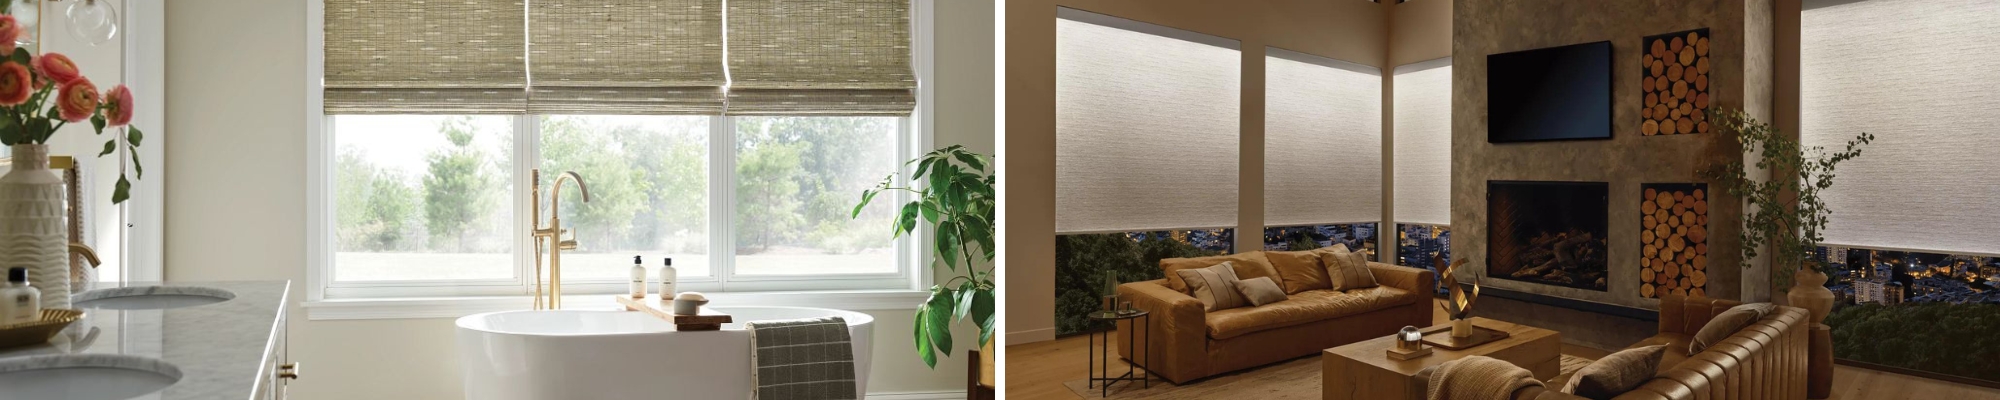 Improve Your Window Treatment Privacy